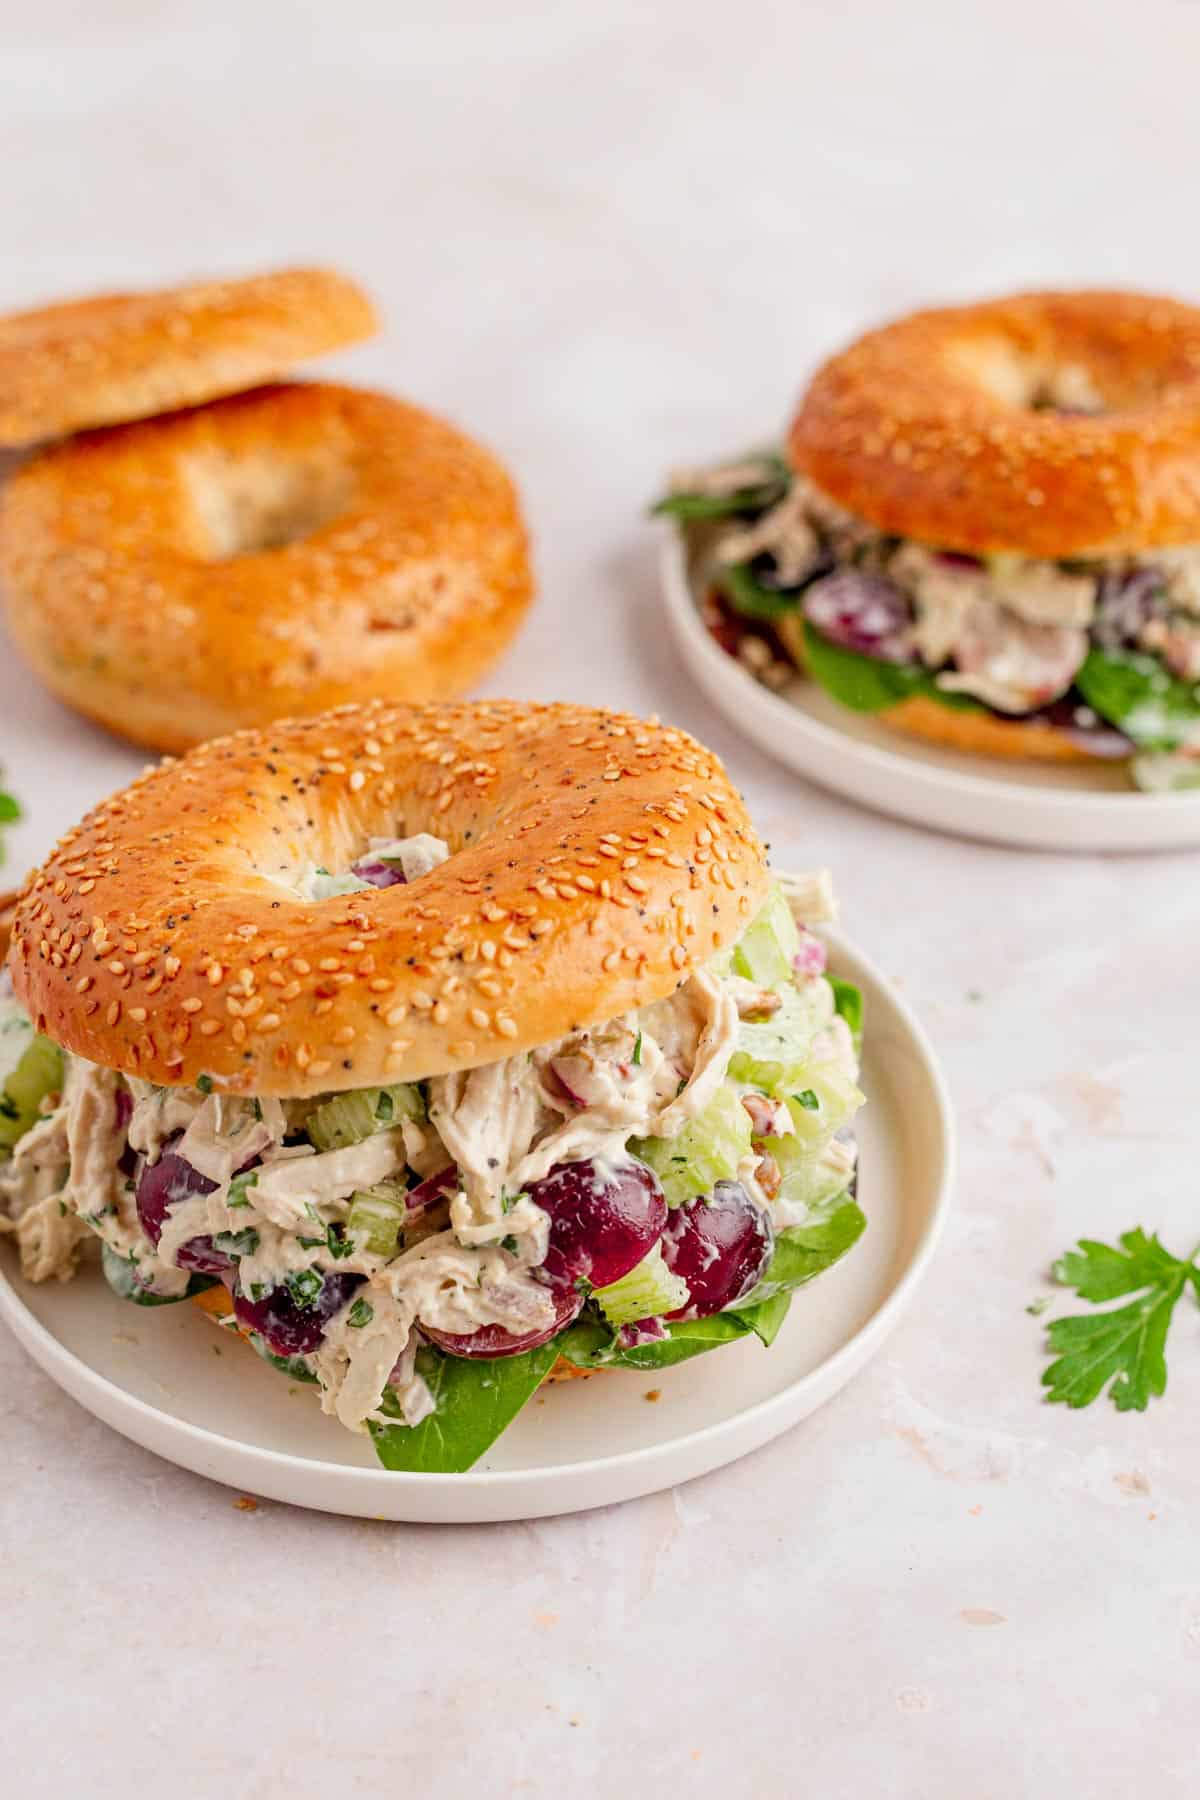 Chicken Salad With Graes And Pecans with Bagel